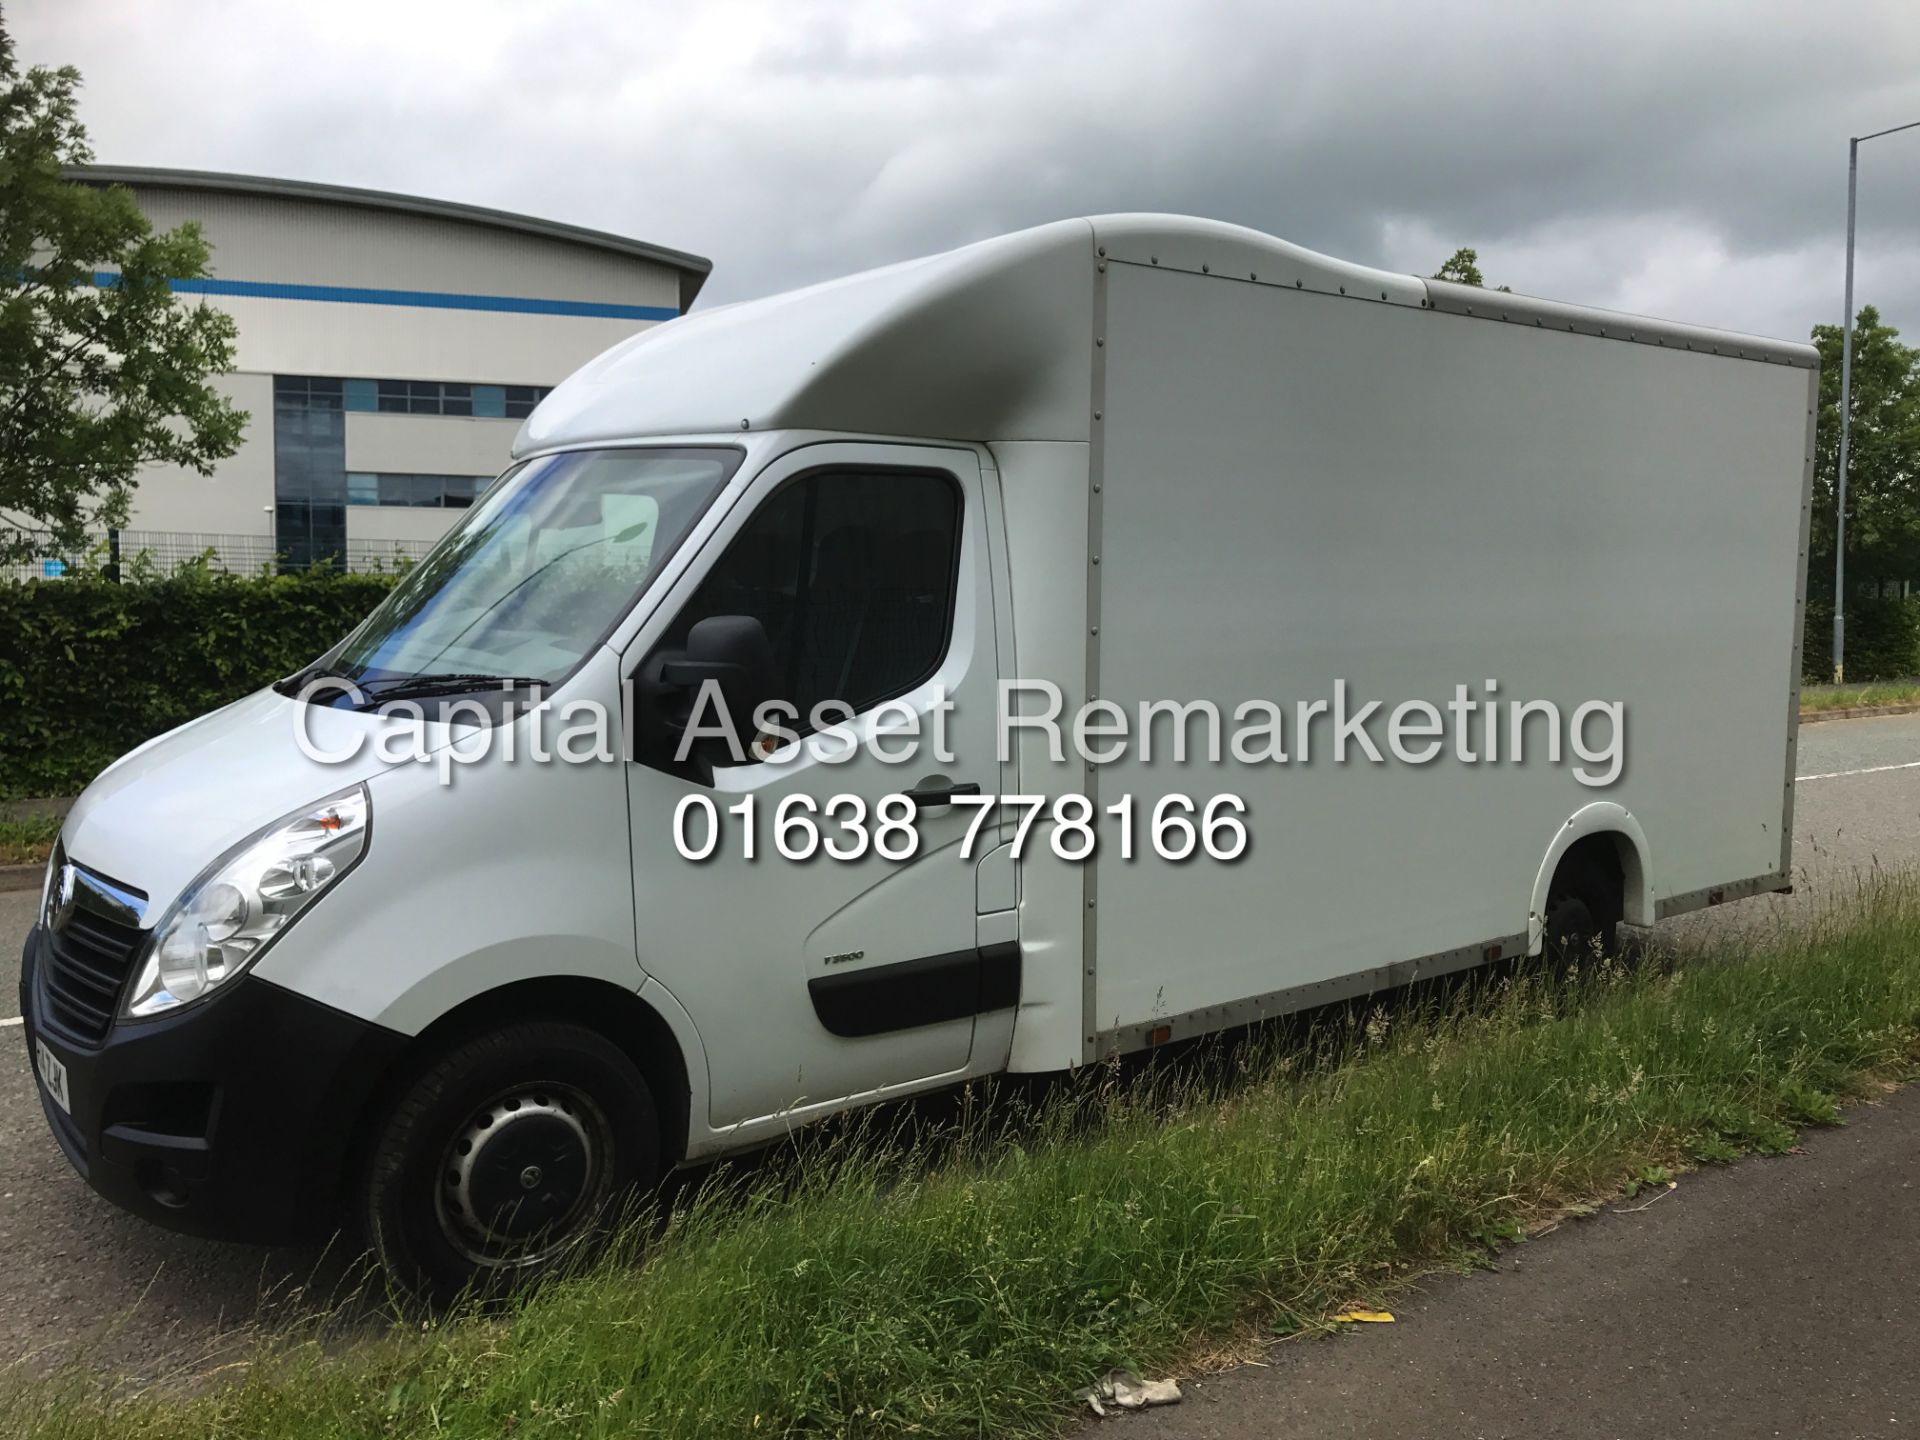 On Sale VAUXHALL MOVANO 2.3CDTI "125BHP-6 SPEED" 14FT LO-LOADER BODY IDEAL REMOVALS TRUCK (14 REG) - Image 5 of 15